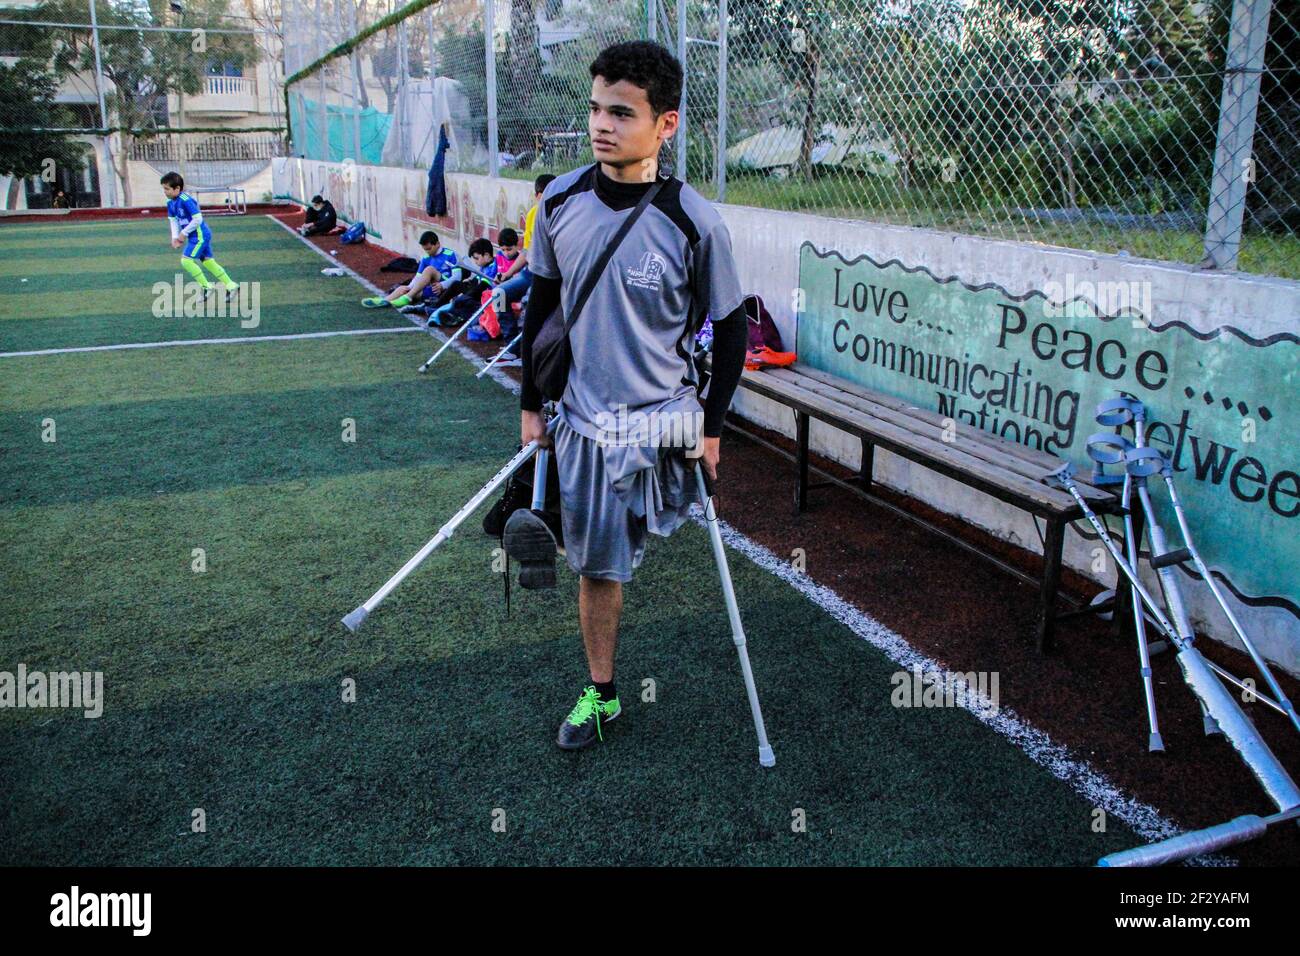 March 13, 2021: Gaza, Palestine. 13 March 2021. Palestinians with crutches play football in the Al-Jazeera Club in Gaza City on the 'Palestinian Day of the injured''. The players have lost a leg either in Israeli attacks on Gaza or in the March of Return demonstrations, during which they were shot to their limbs by Israeli soldiers based at the perimeter fence with Gaza. Some of the severe limb gunshot wounds have required complex limb reconstruction treatments, while others have required amputation. Yet, despite losing a leg, many Palestinians have not lost their resilience and determinati Stock Photo